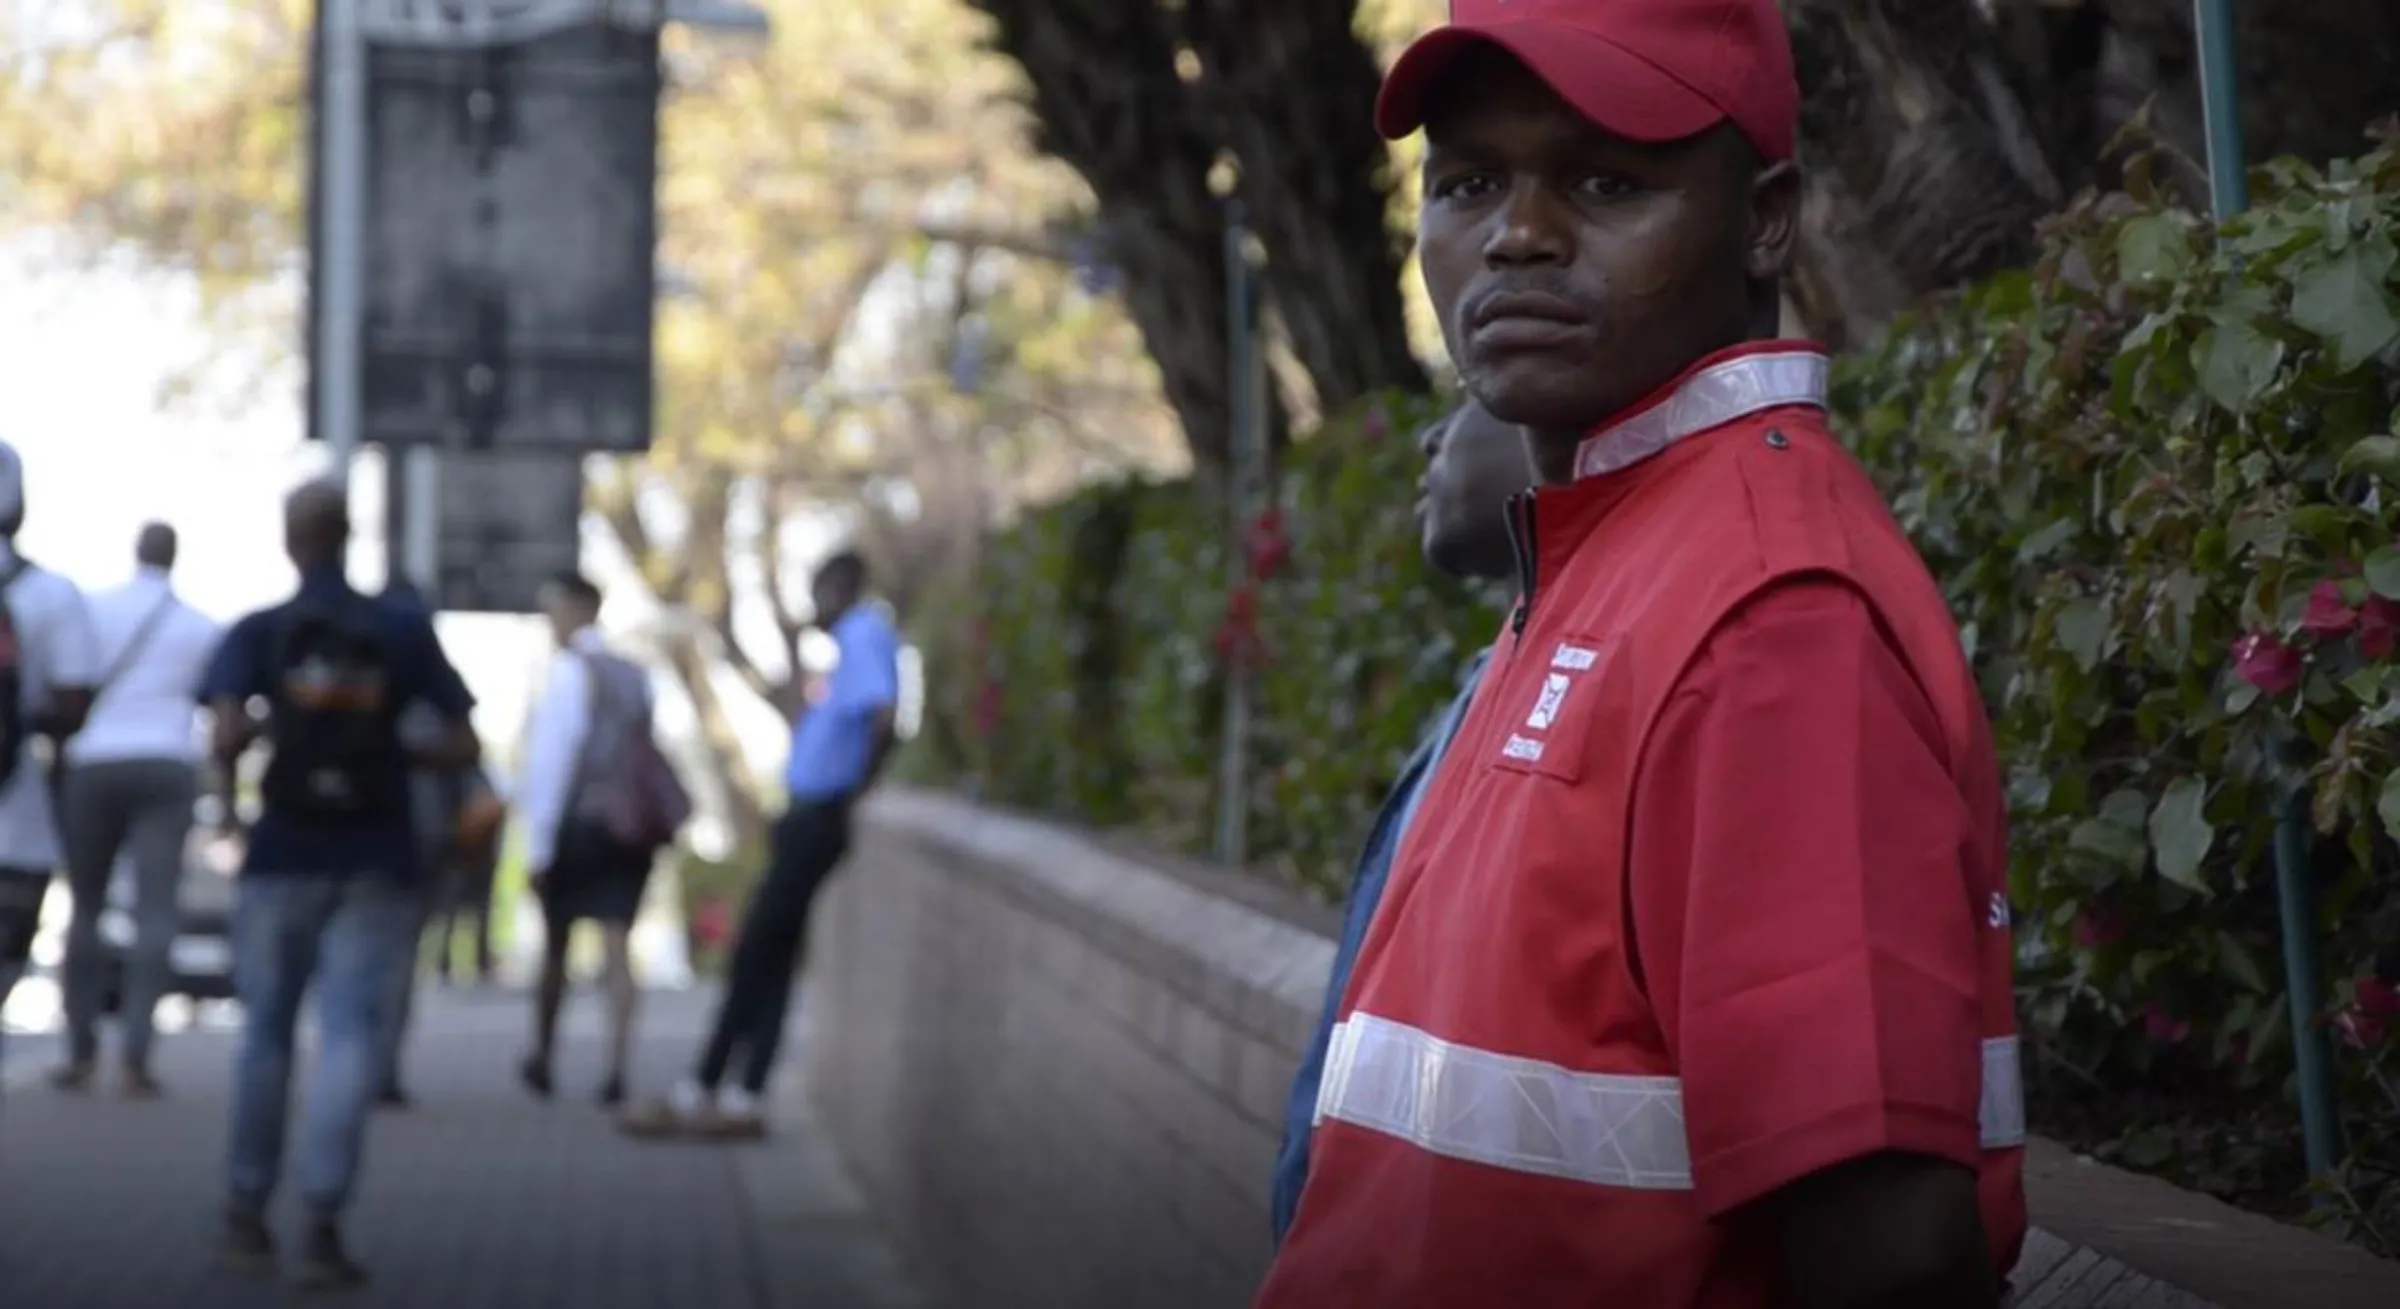 A security guard leans against a wall in Sandton in Johannesburg, South Africa, 8 October 2019. Thomson Reuters Foundation/Kim Harrisberg